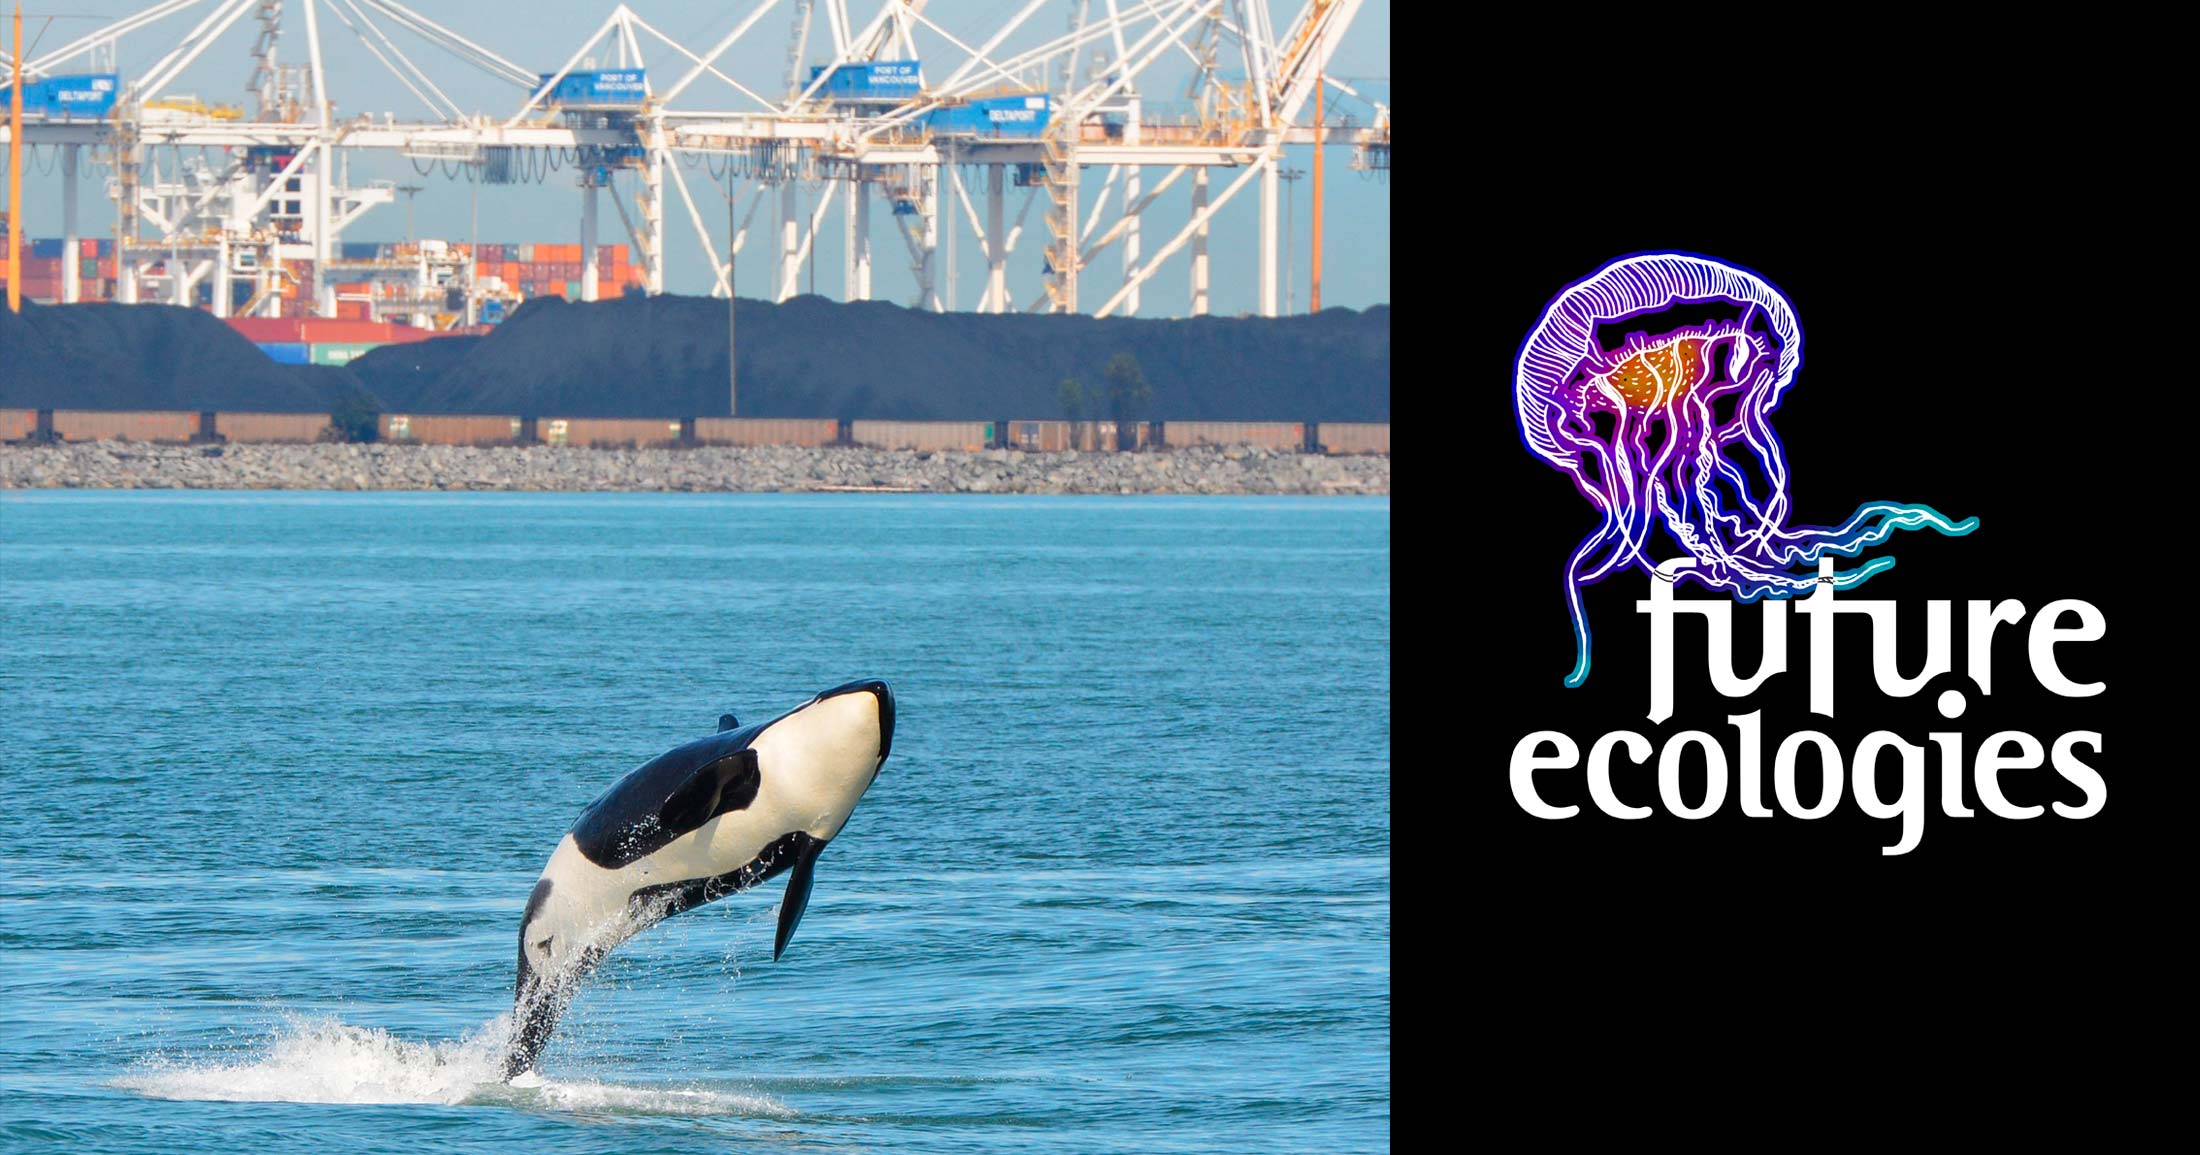 A killer whale jumps into the air with the Roberts Bank port looming in the background, and the Future Ecologies logo floating off to the right.